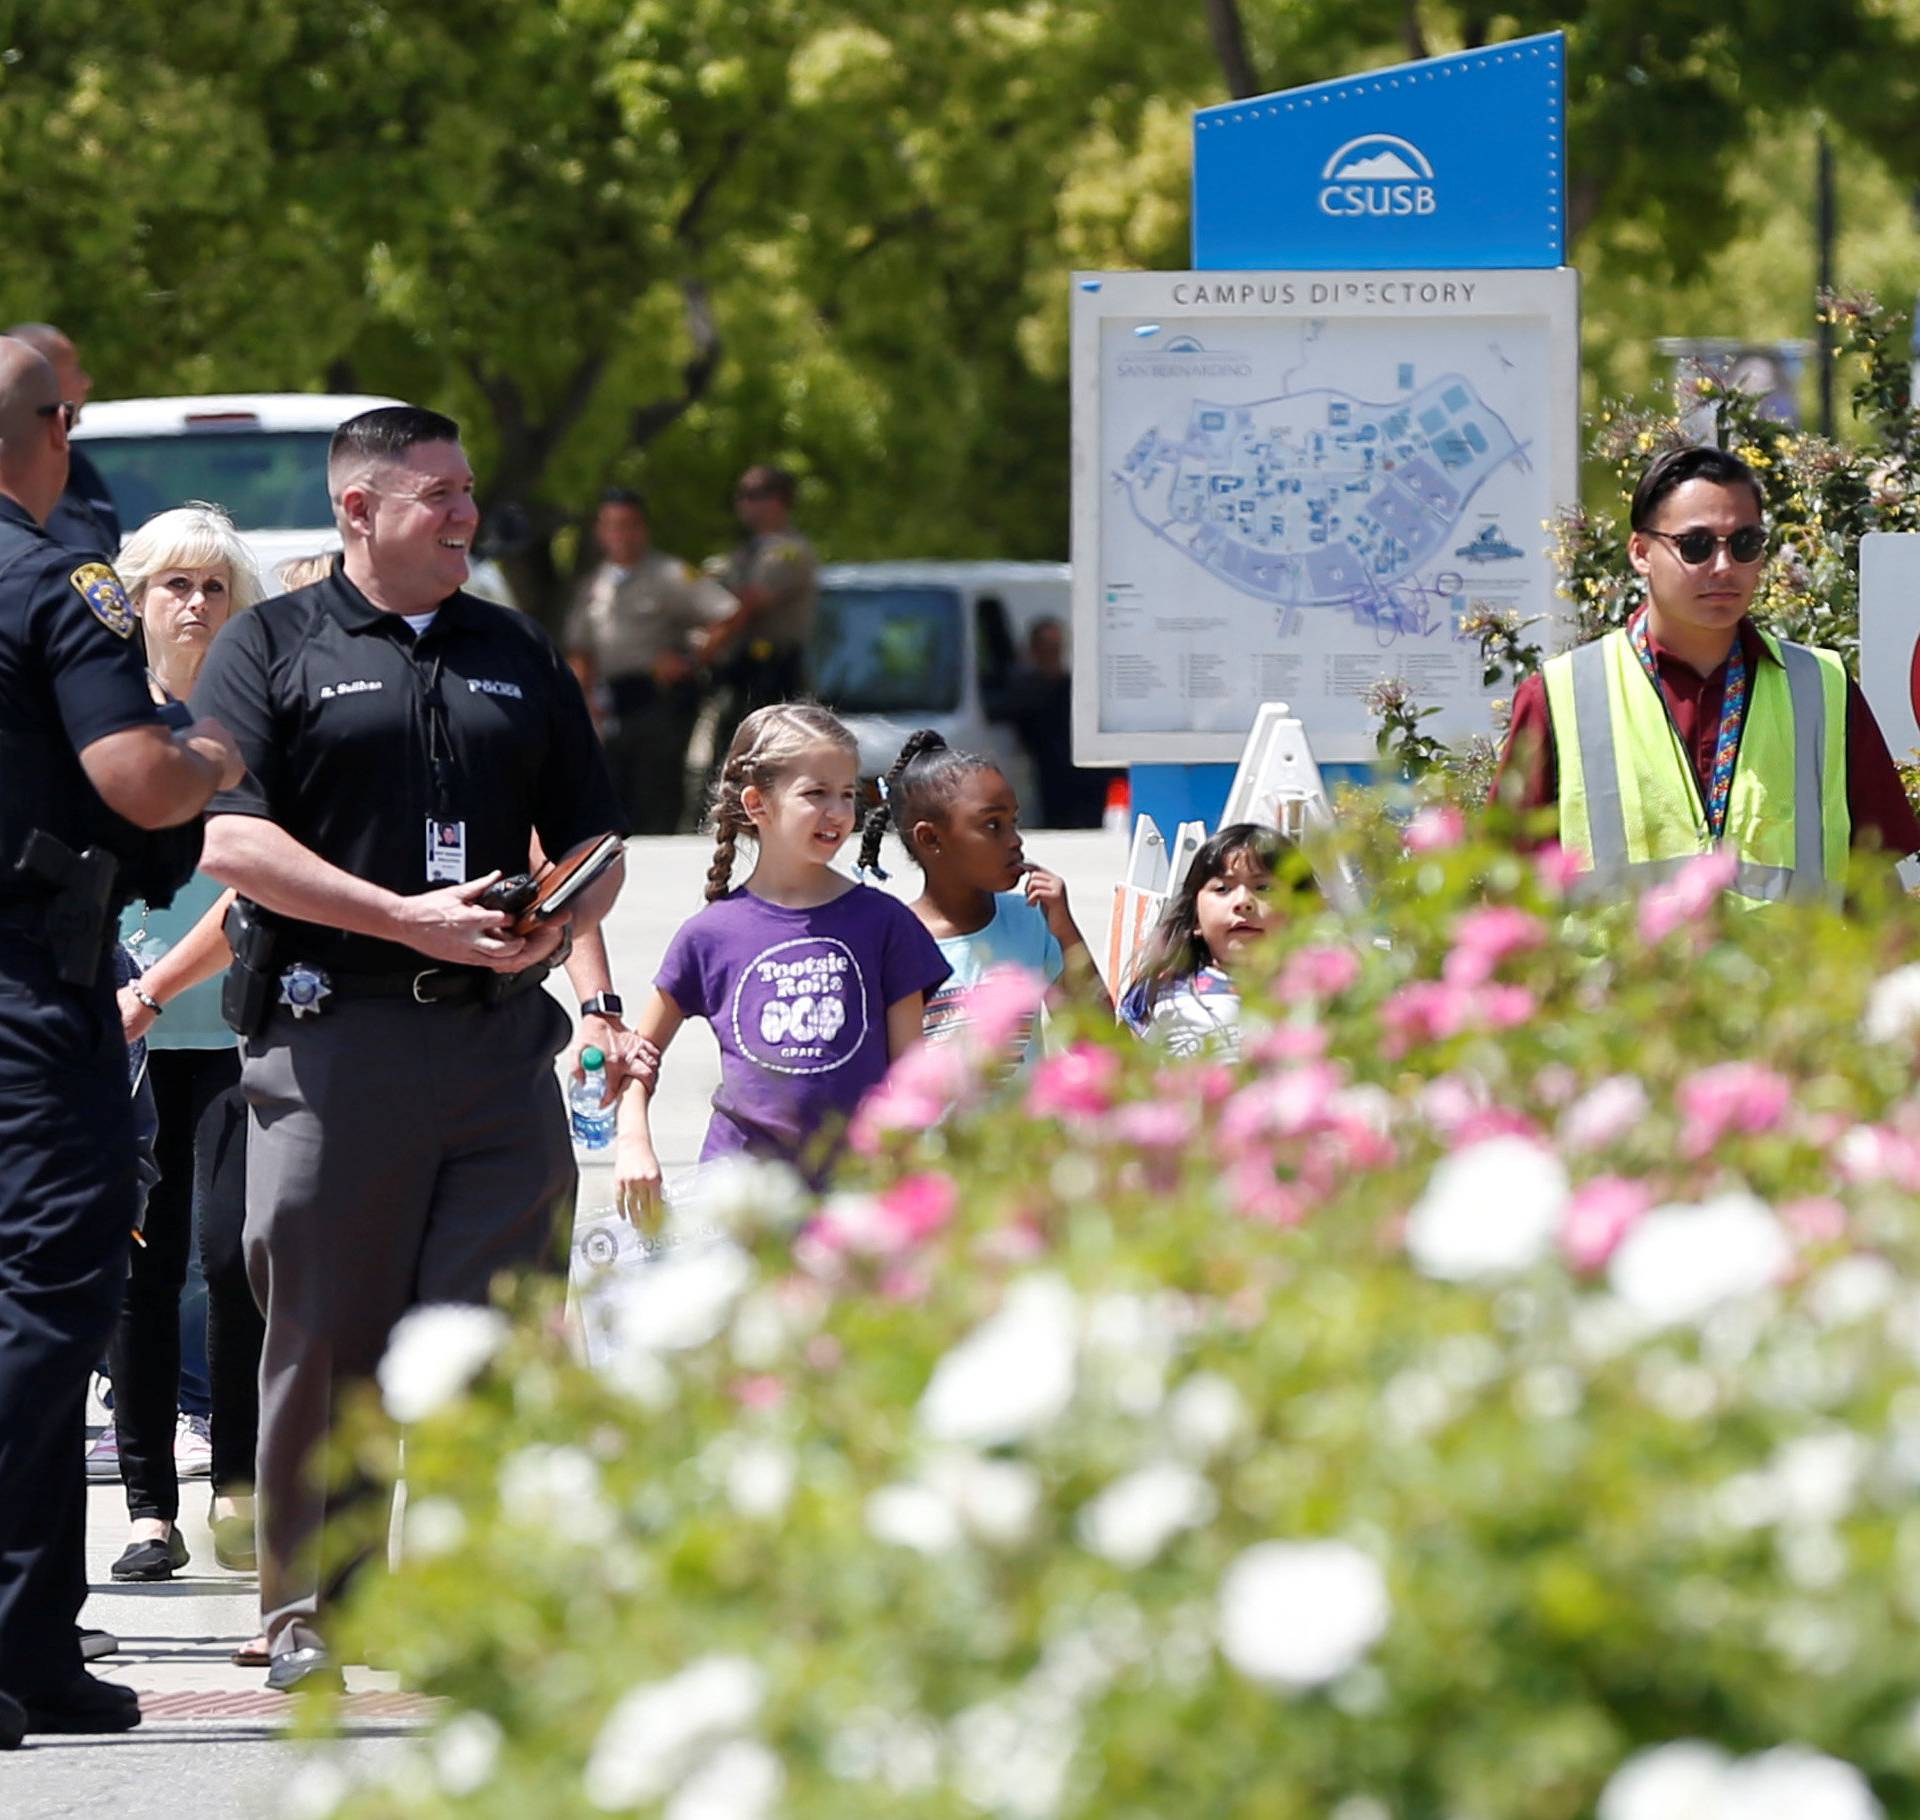 Police officers escort students from a campus of California State University - San Bernardino, where they were evacuated after a shooting at North Park Elementary School